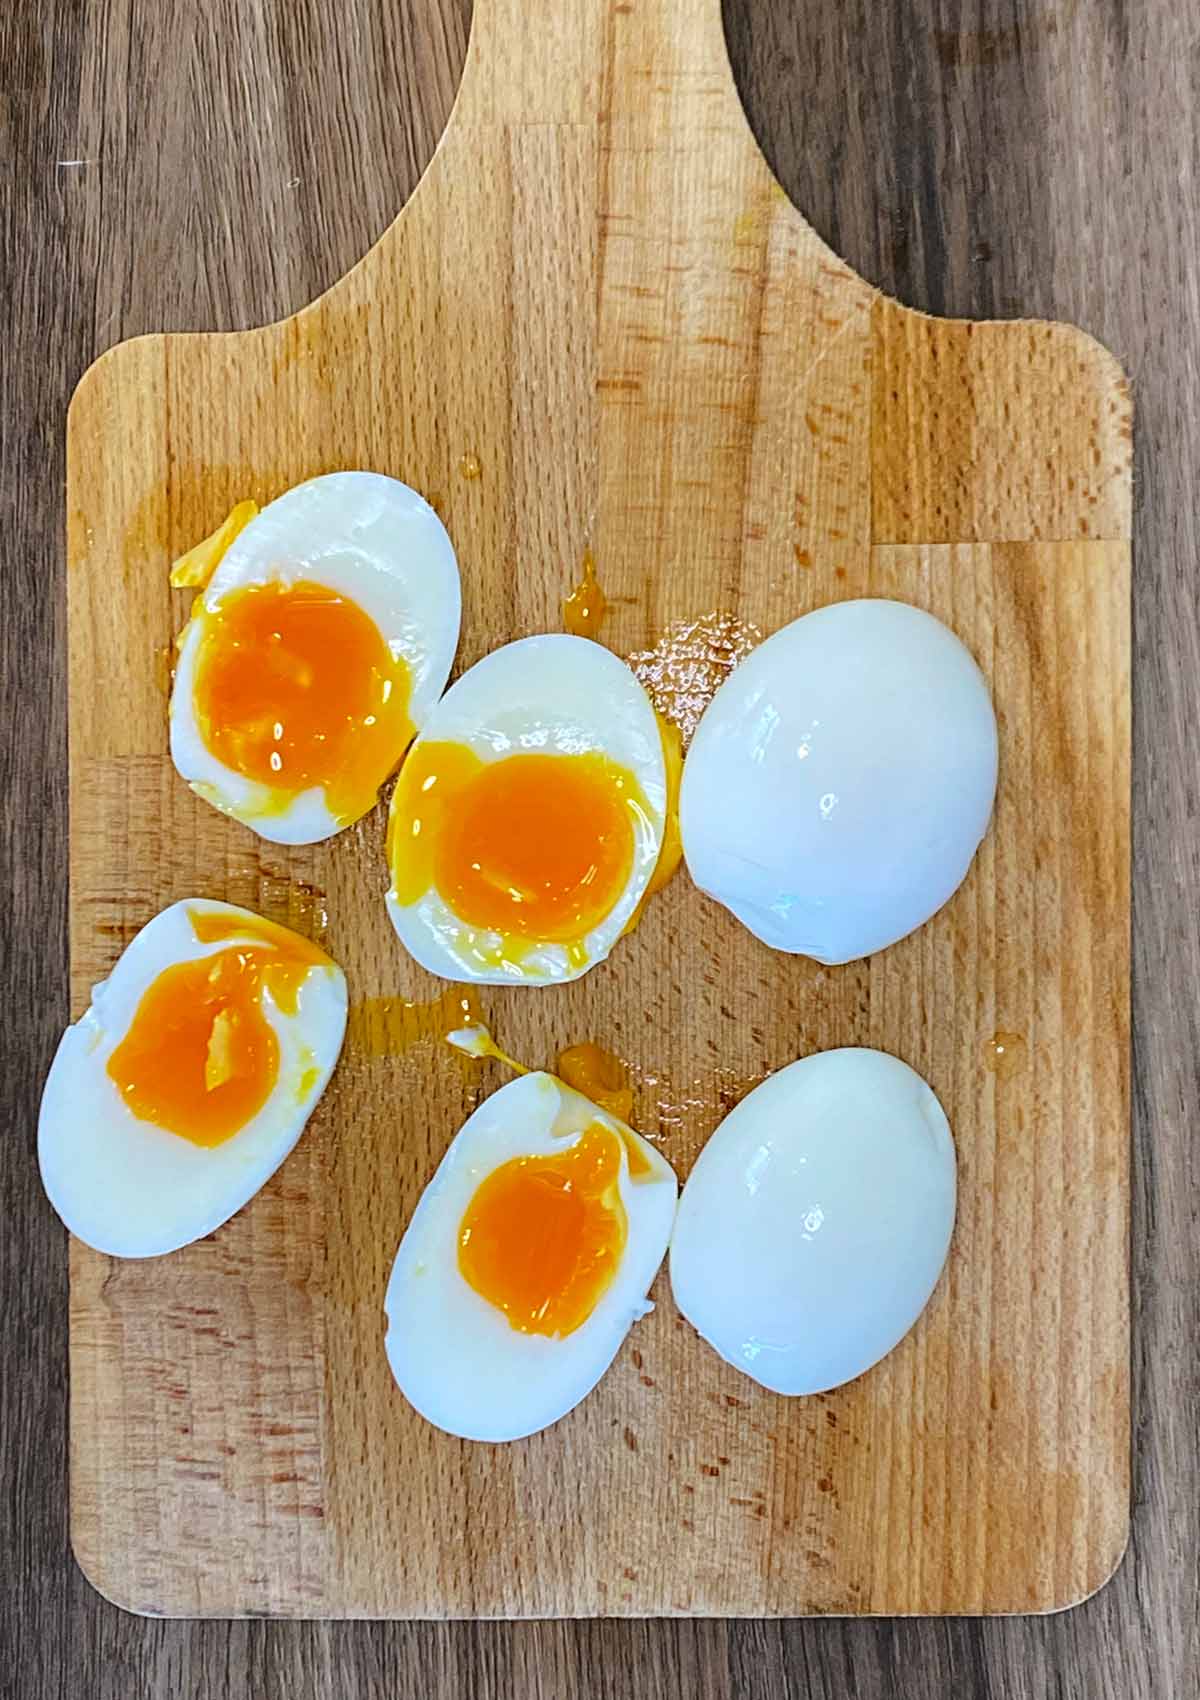 Halved boiled eggs on a wooden board.